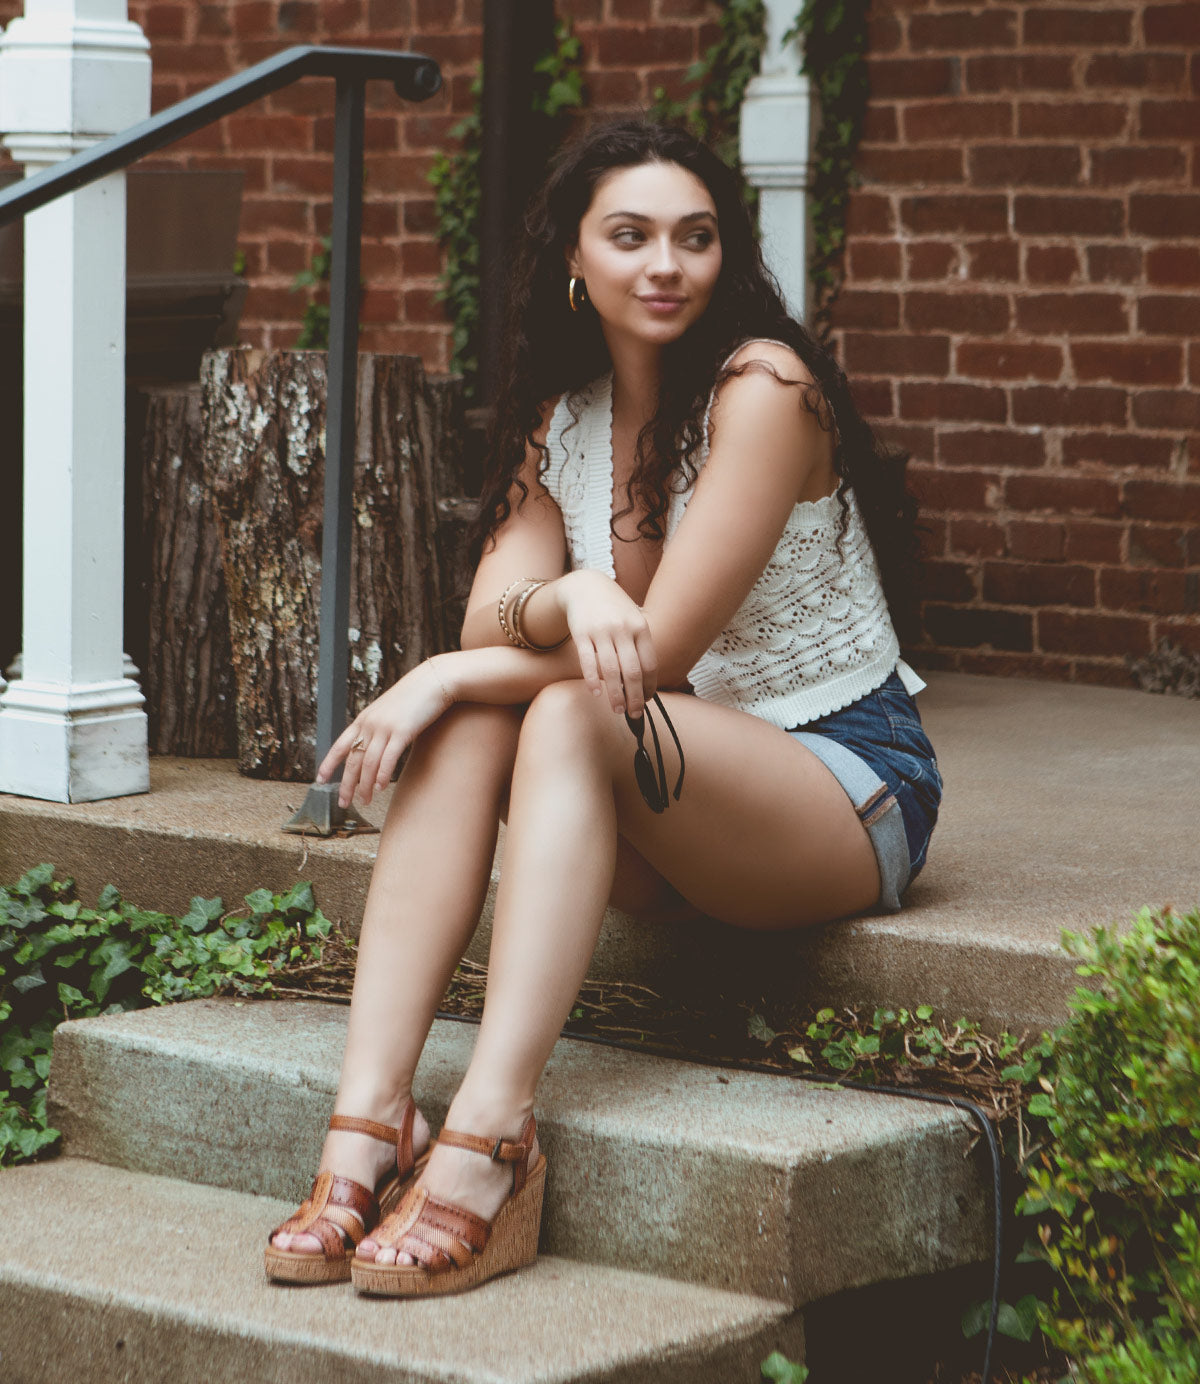 
                  
                    A person with long, dark hair sits on outdoor steps, wearing a white sleeveless top, denim shorts, and Roan Different brown heeled sandals with a padded leather footbed. They are looking to the side, with greenery and a brick wall in the background.
                  
                